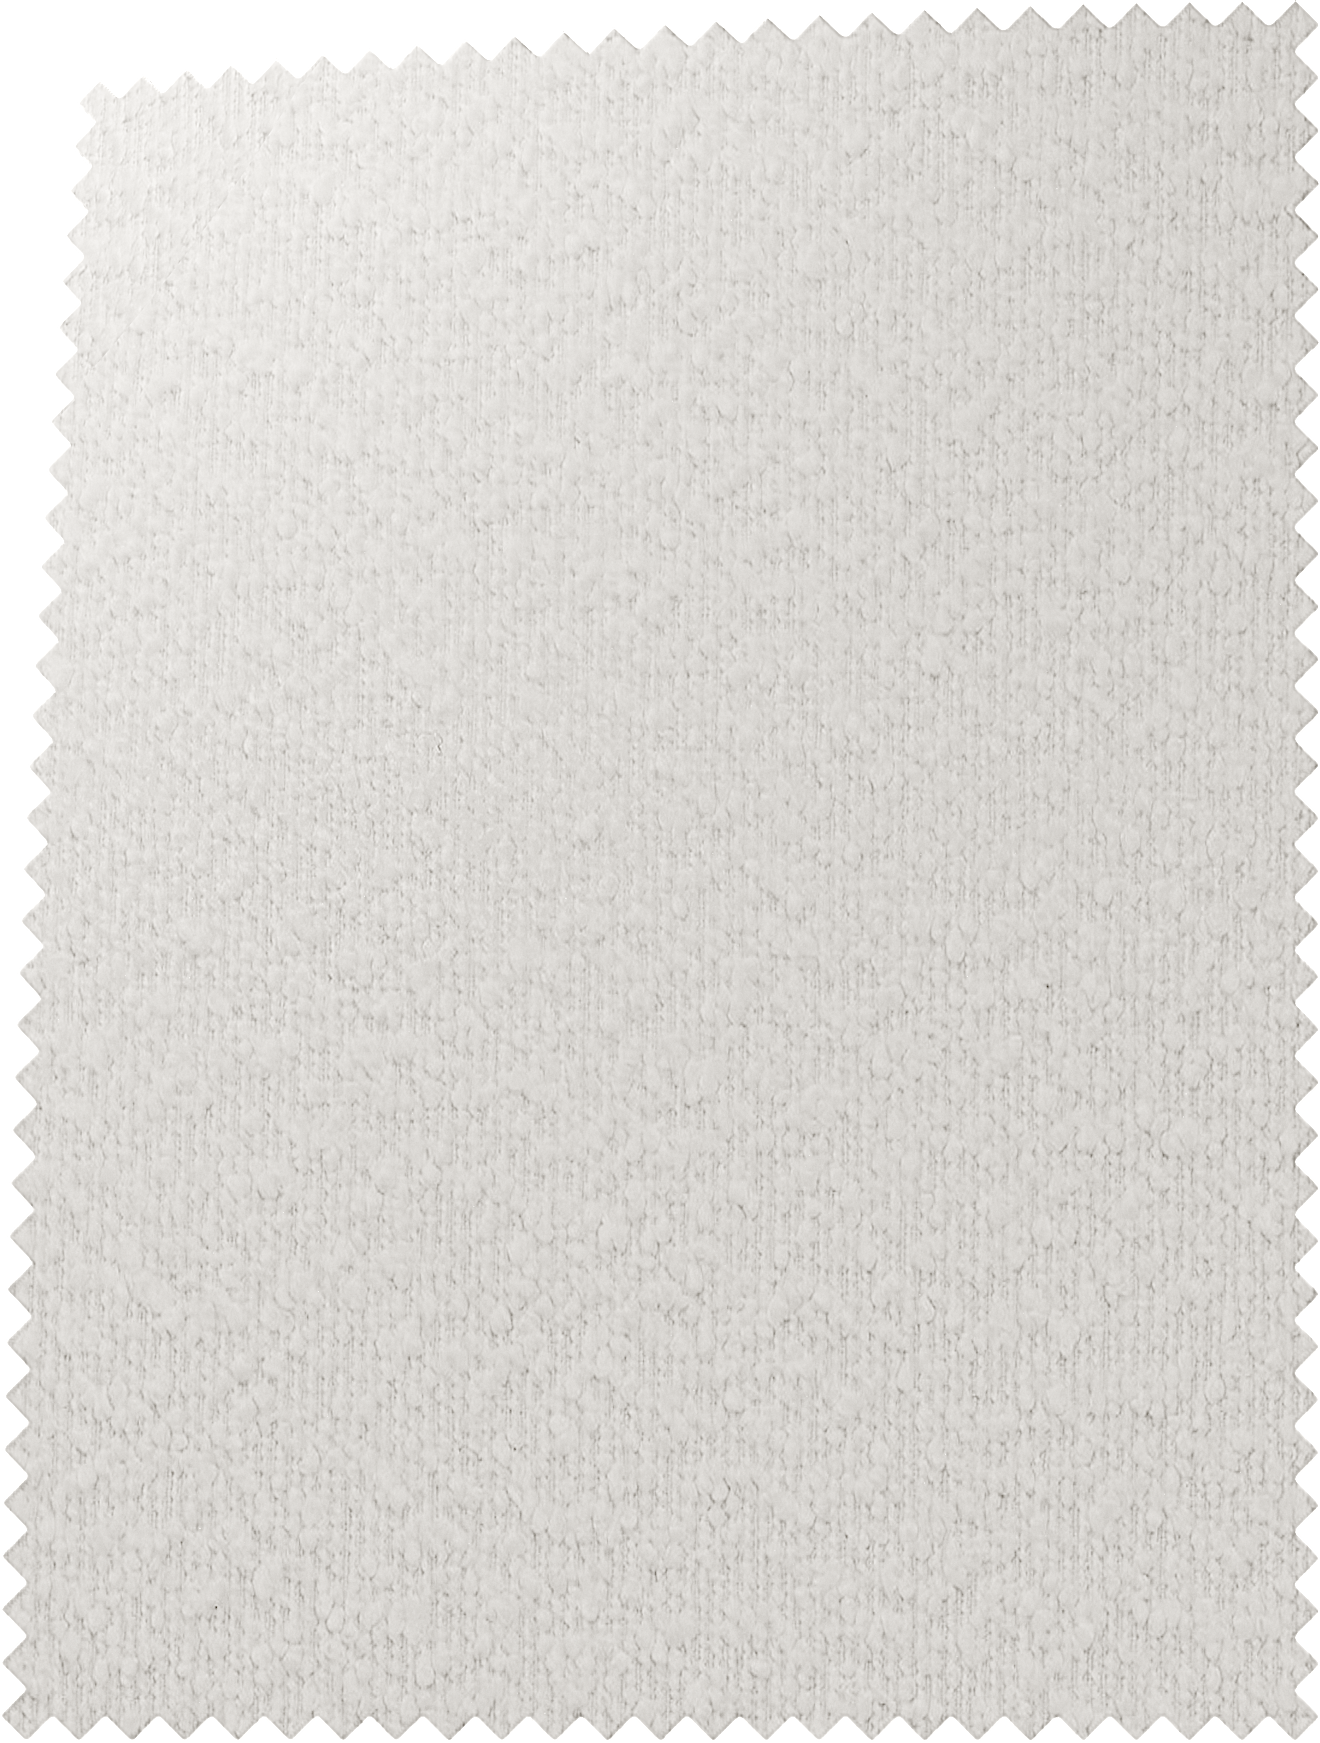 Boucle Ivory Swatch paper from vantpanel with a green zigzag border.